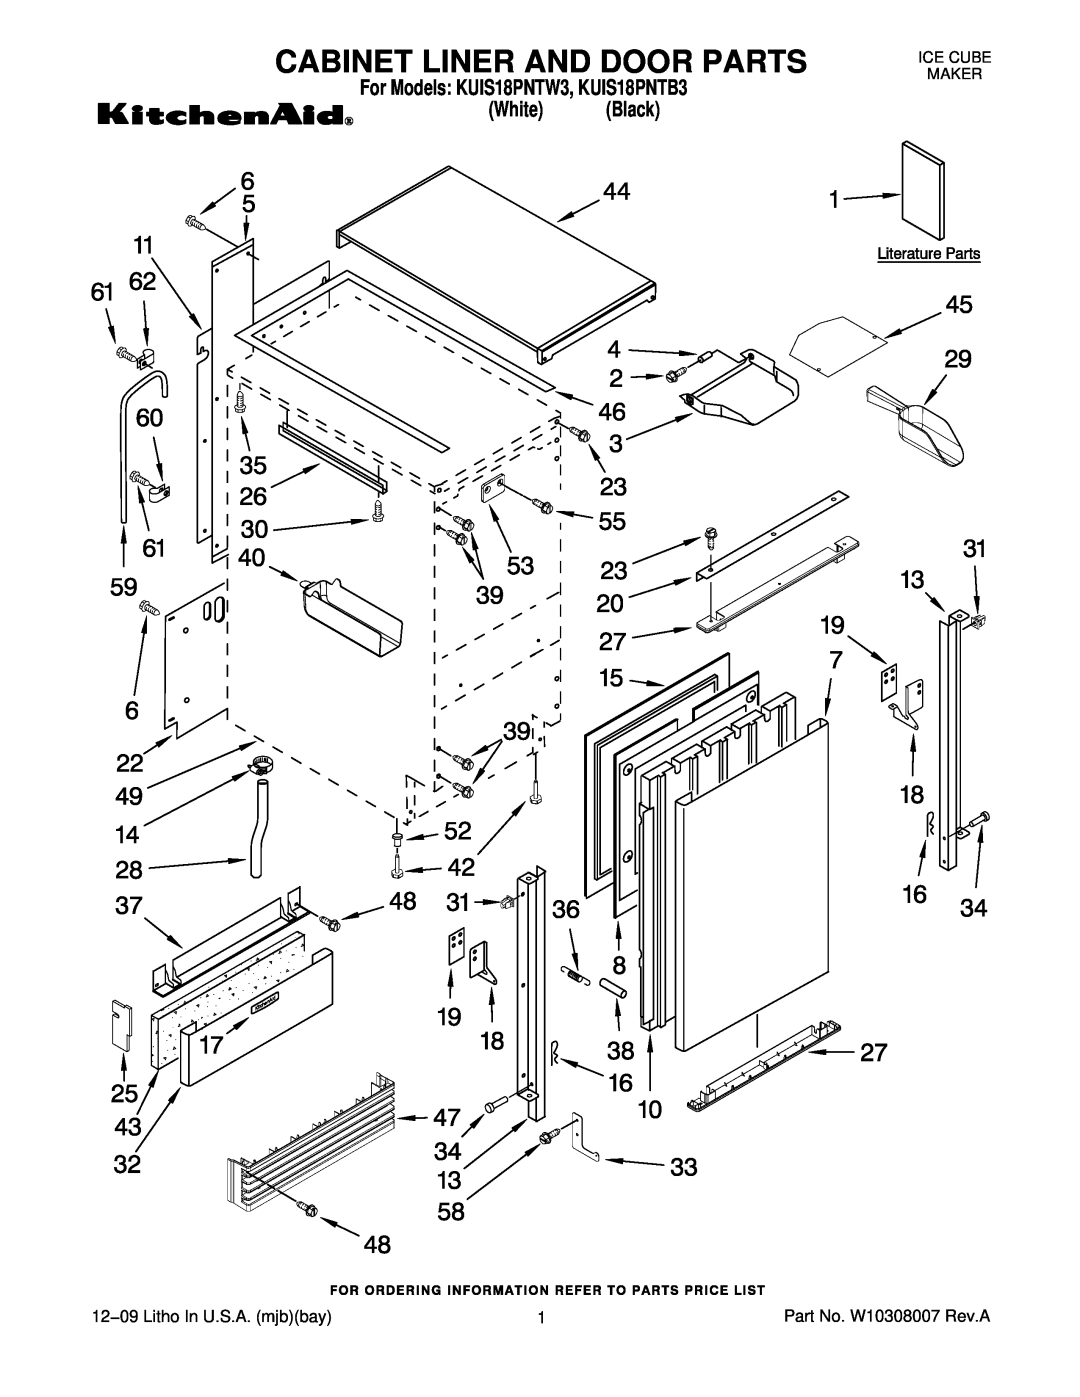 KitchenAid manual Cabinet Liner And Door Parts, For Models KUIS18PNTW3, KUIS18PNTB3 White Black, Ice Cube Maker 